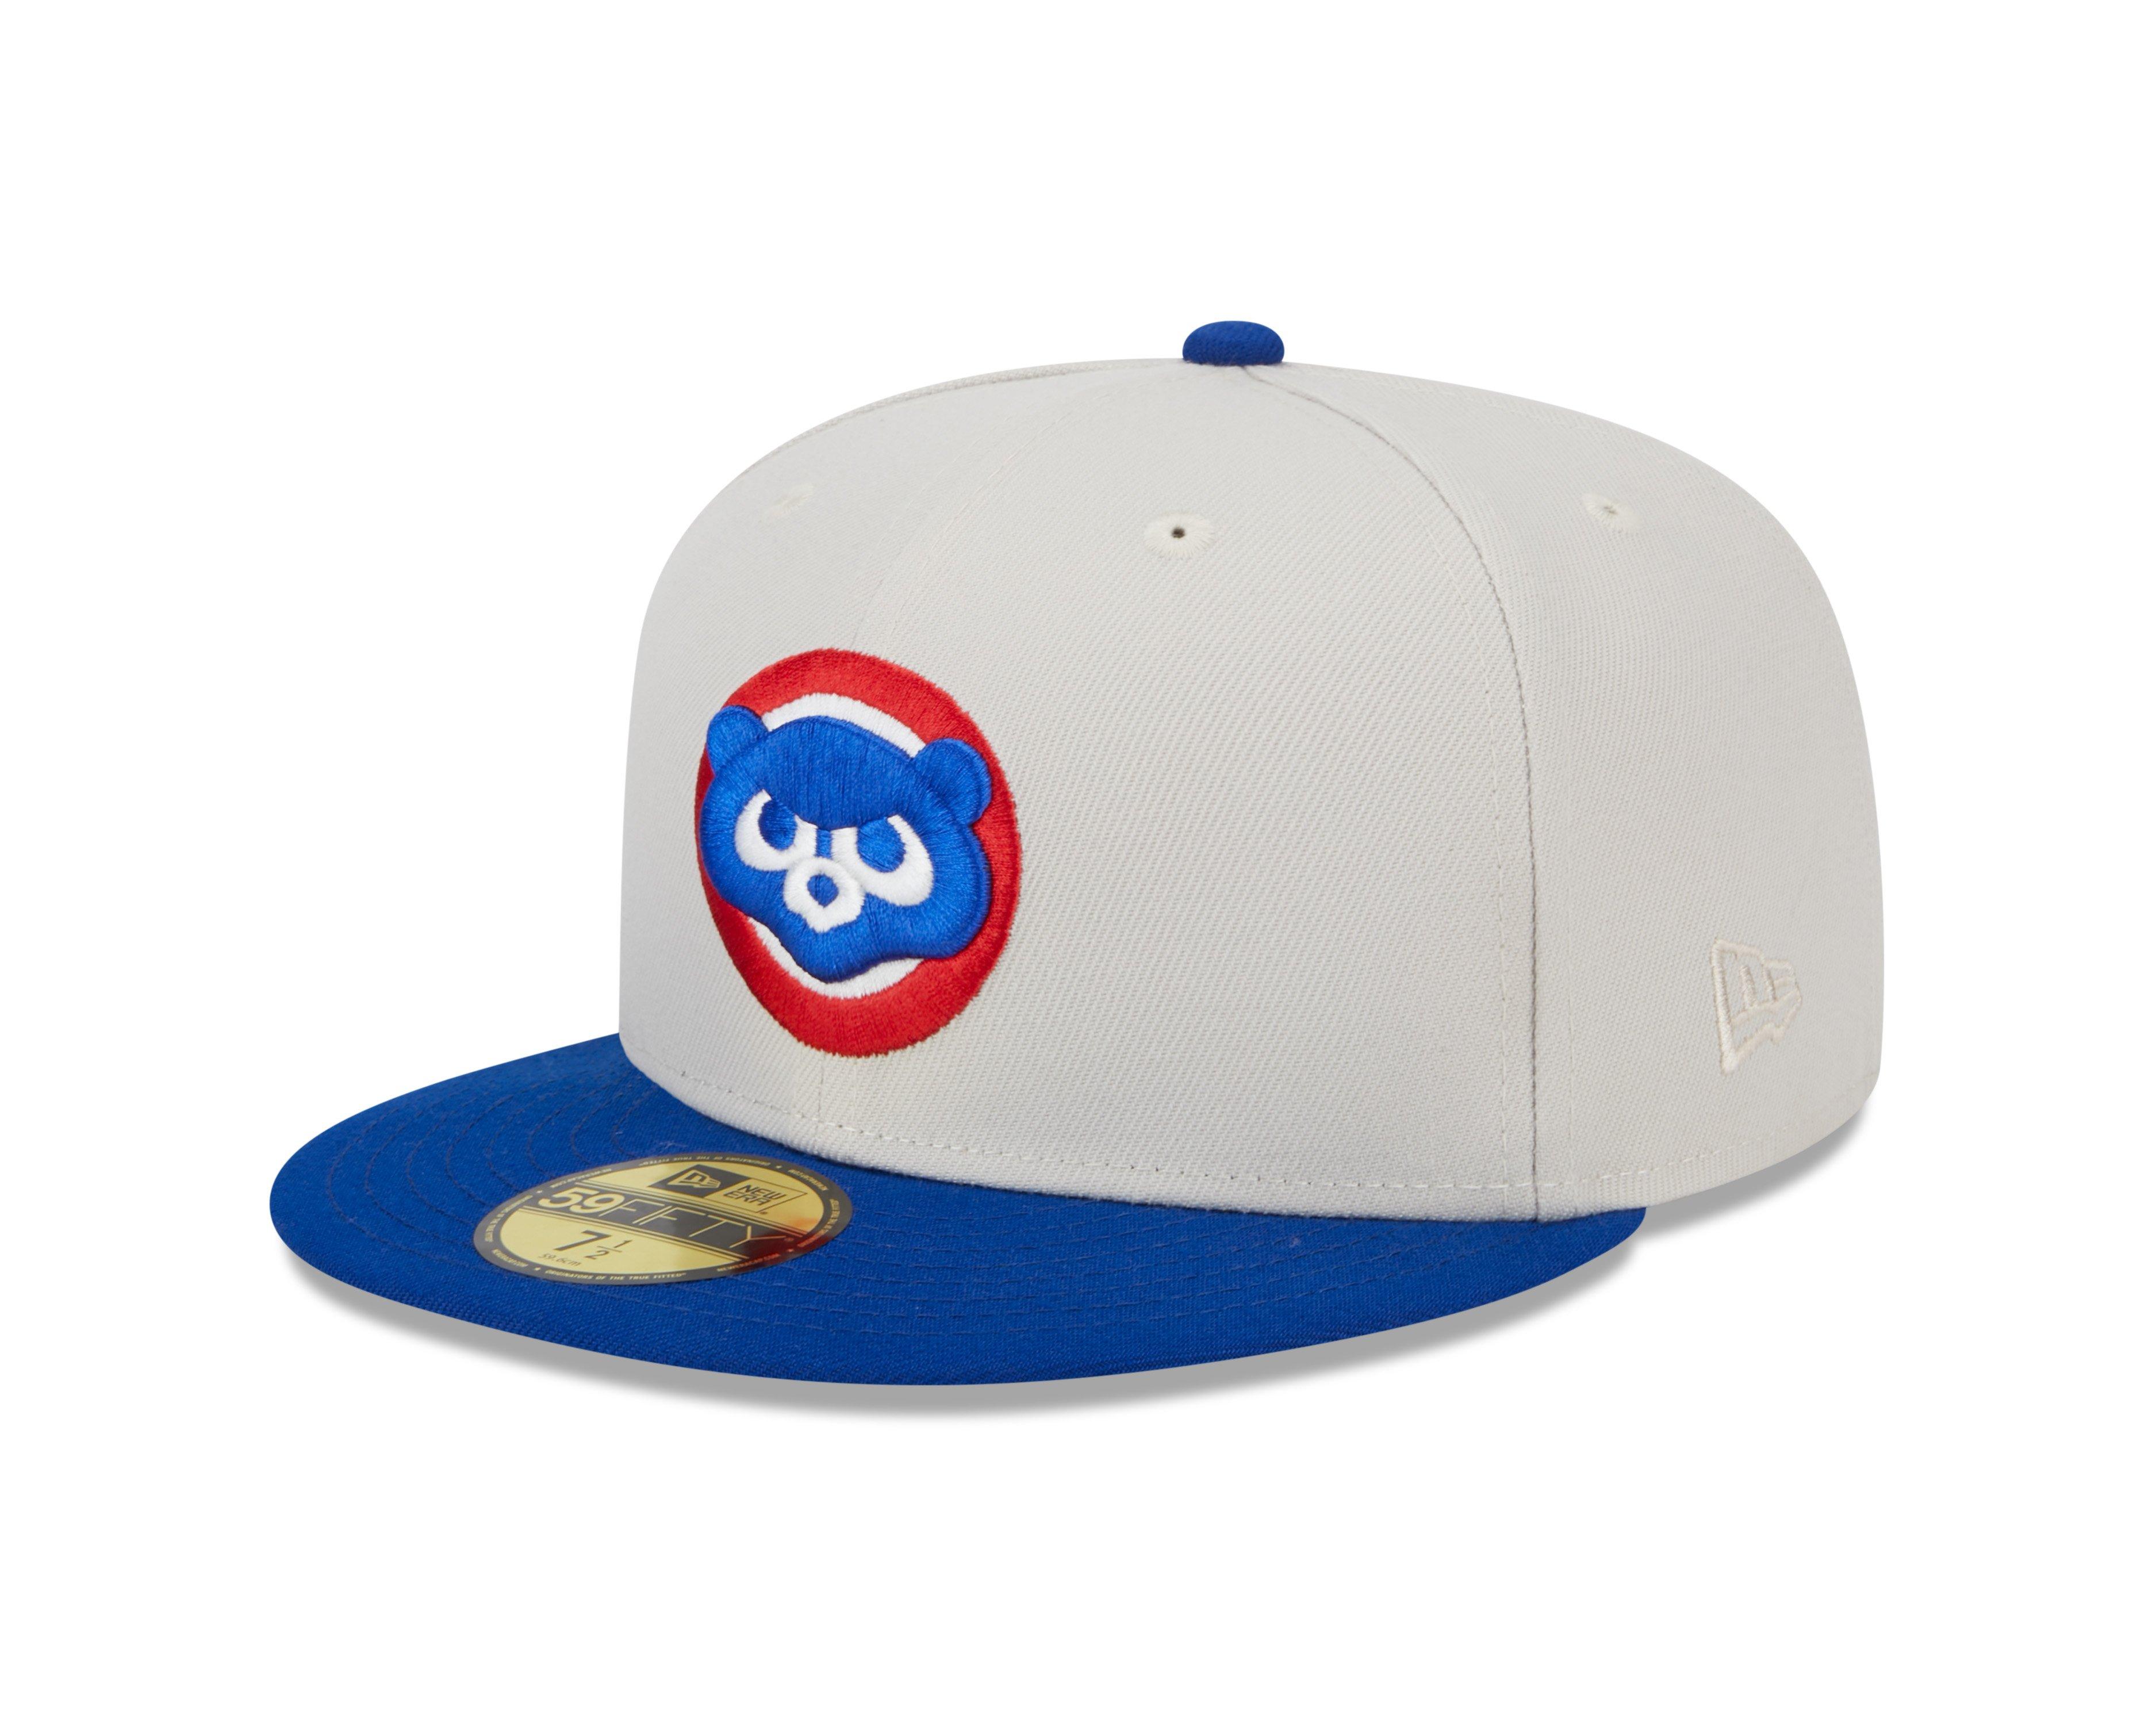 Cubs game look  Baseball outfit, Outfits with hats, Chicago outfit